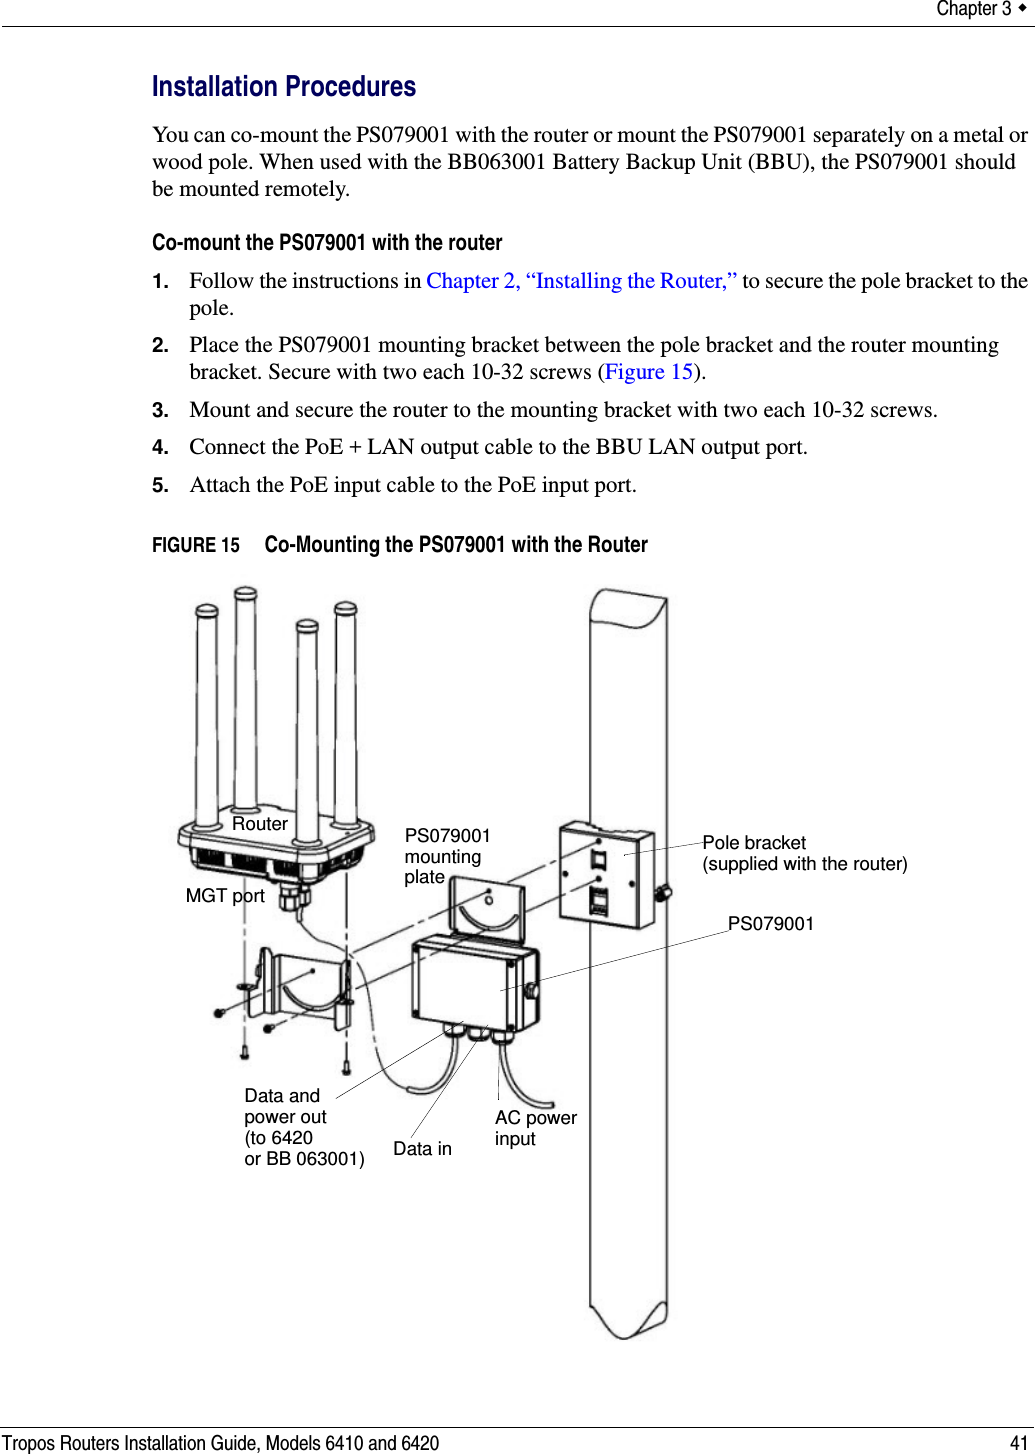 Chapter 3  Tropos Routers Installation Guide, Models 6410 and 6420 41Installation ProceduresYou can co-mount the PS079001 with the router or mount the PS079001 separately on a metal or wood pole. When used with the BB063001 Battery Backup Unit (BBU), the PS079001 should be mounted remotely.Co-mount the PS079001 with the router1. Follow the instructions in Chapter 2, “Installing the Router,” to secure the pole bracket to the pole.2. Place the PS079001 mounting bracket between the pole bracket and the router mounting bracket. Secure with two each 10-32 screws (Figure 15).3. Mount and secure the router to the mounting bracket with two each 10-32 screws.4. Connect the PoE + LAN output cable to the BBU LAN output port.5. Attach the PoE input cable to the PoE input port.FIGURE 15   Co-Mounting the PS079001 with the RouterPS079001 Data andAC powerMGT portRouterplatePS079001input mountingData inpower out(to 6420or BB 063001)Pole bracket(supplied with the router)